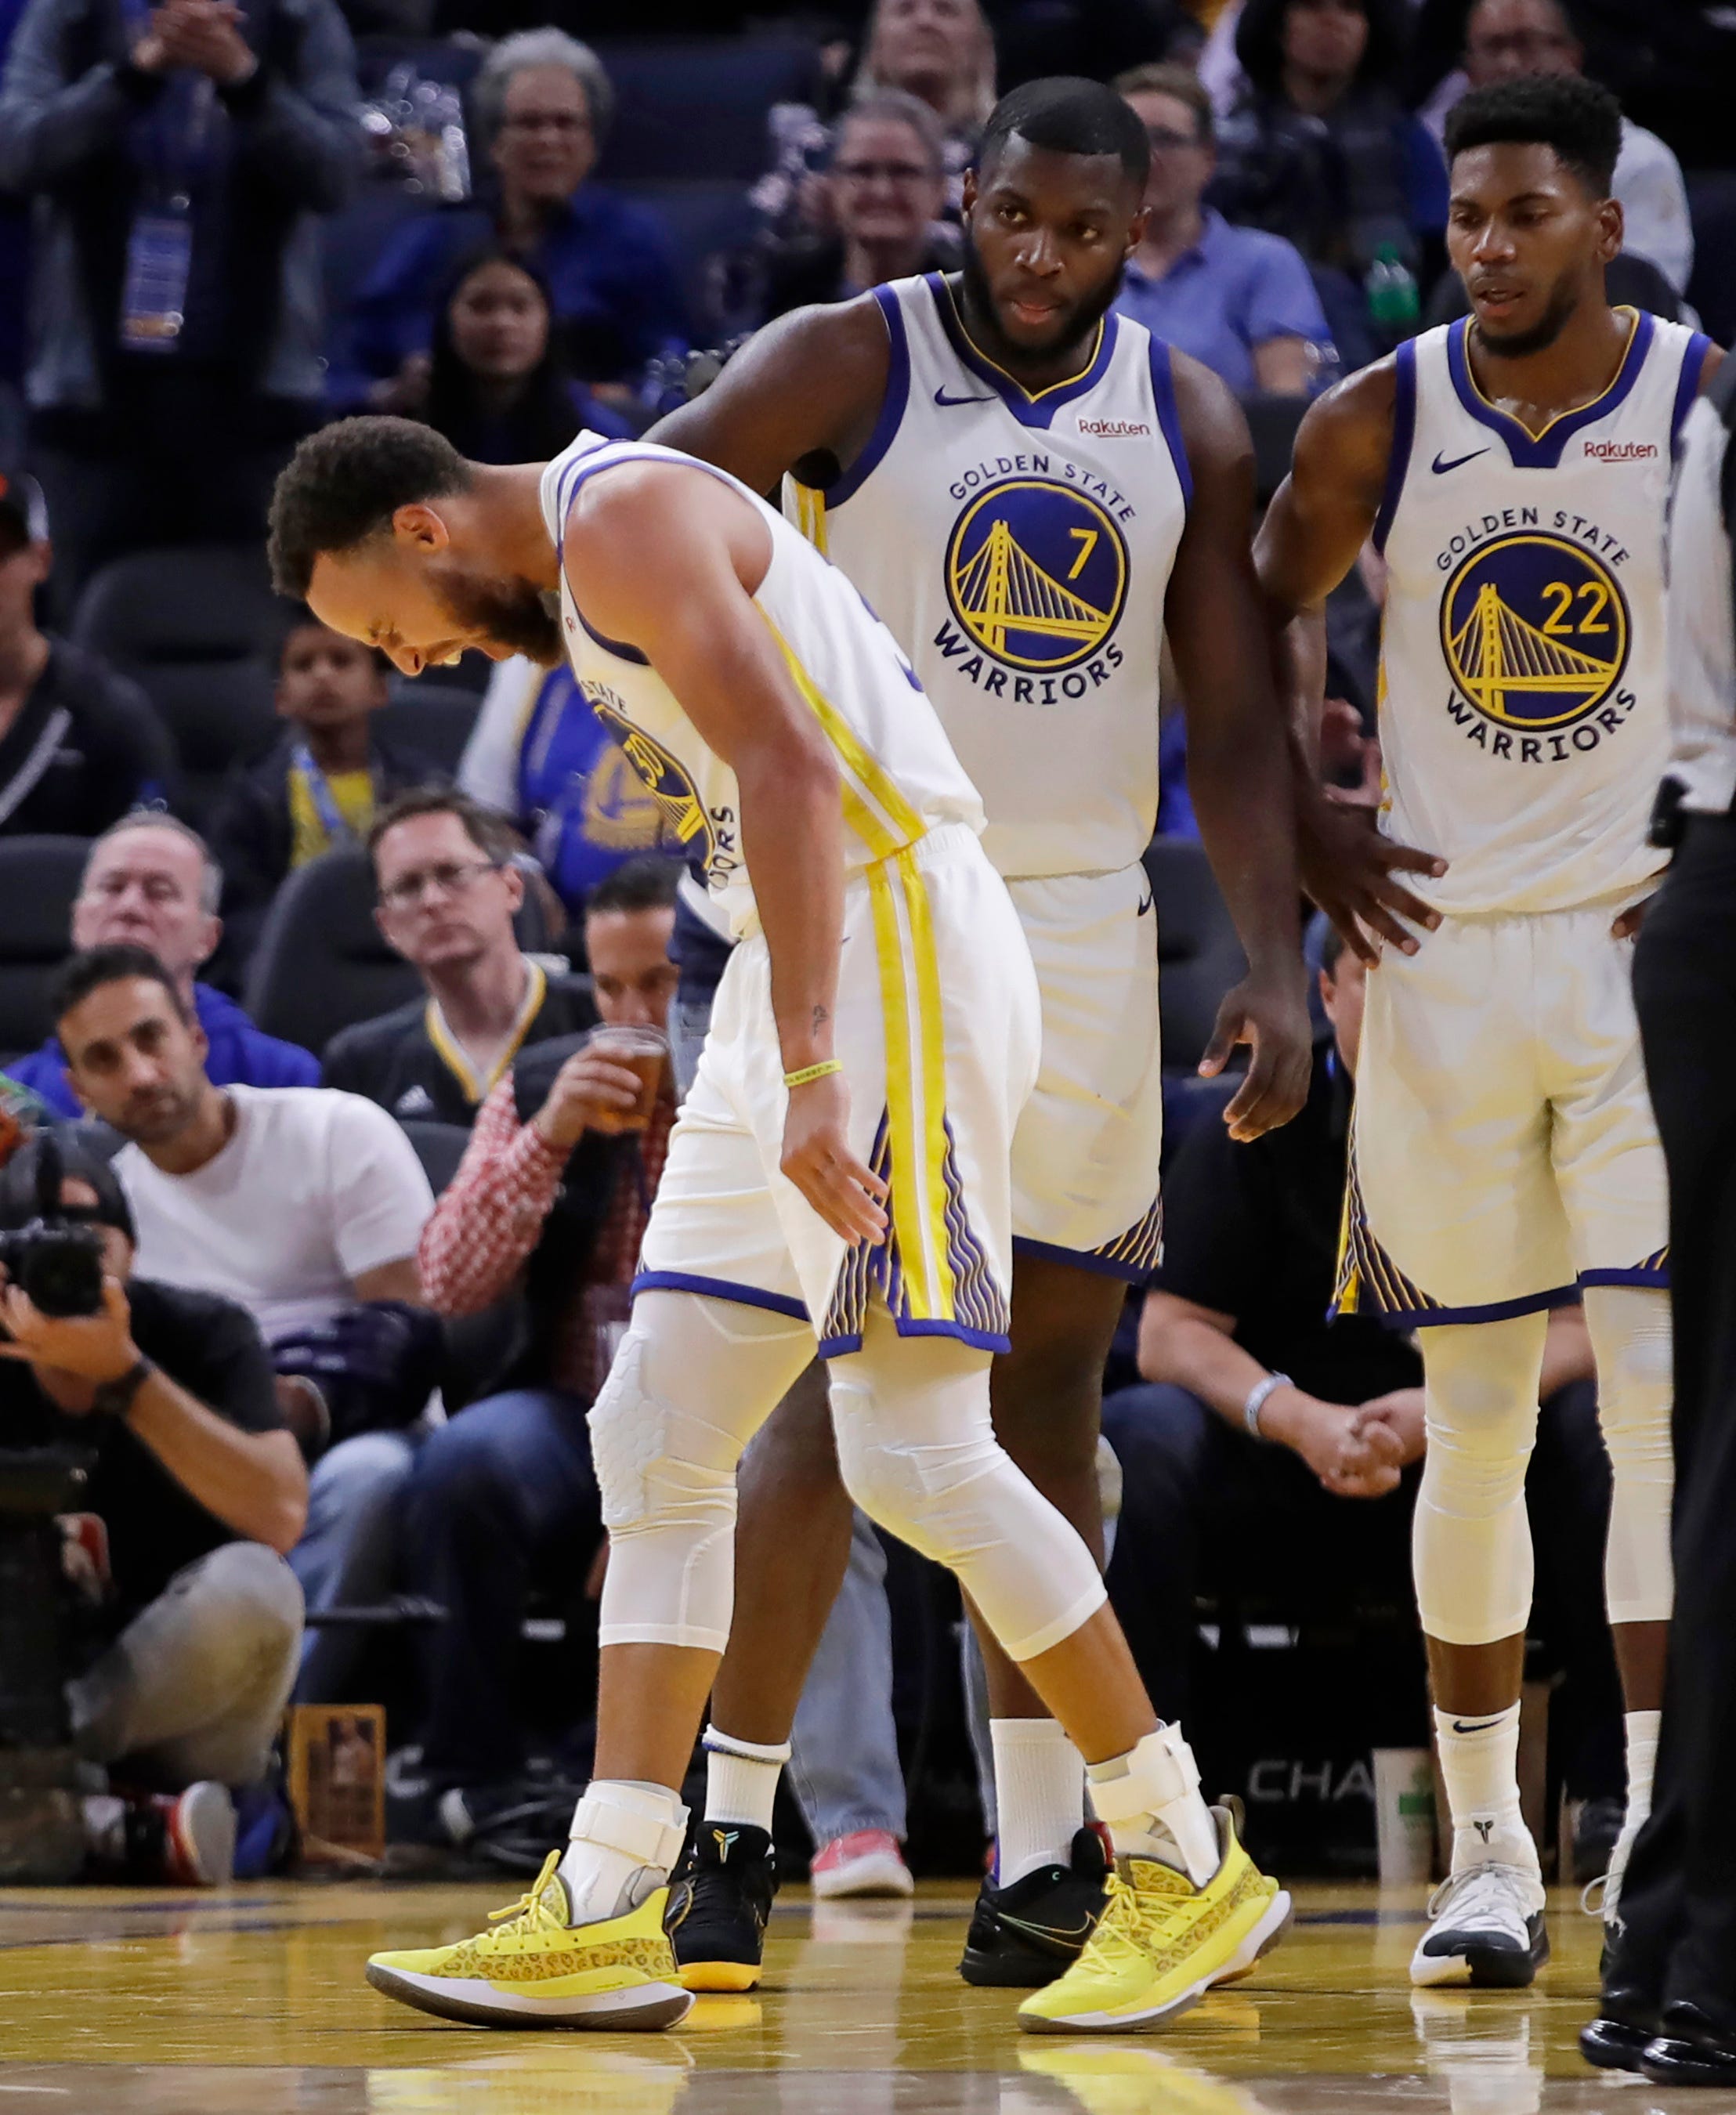 Opinion: Steph Curry injury means Warriors' playoff chances already doomed - USA TODAY